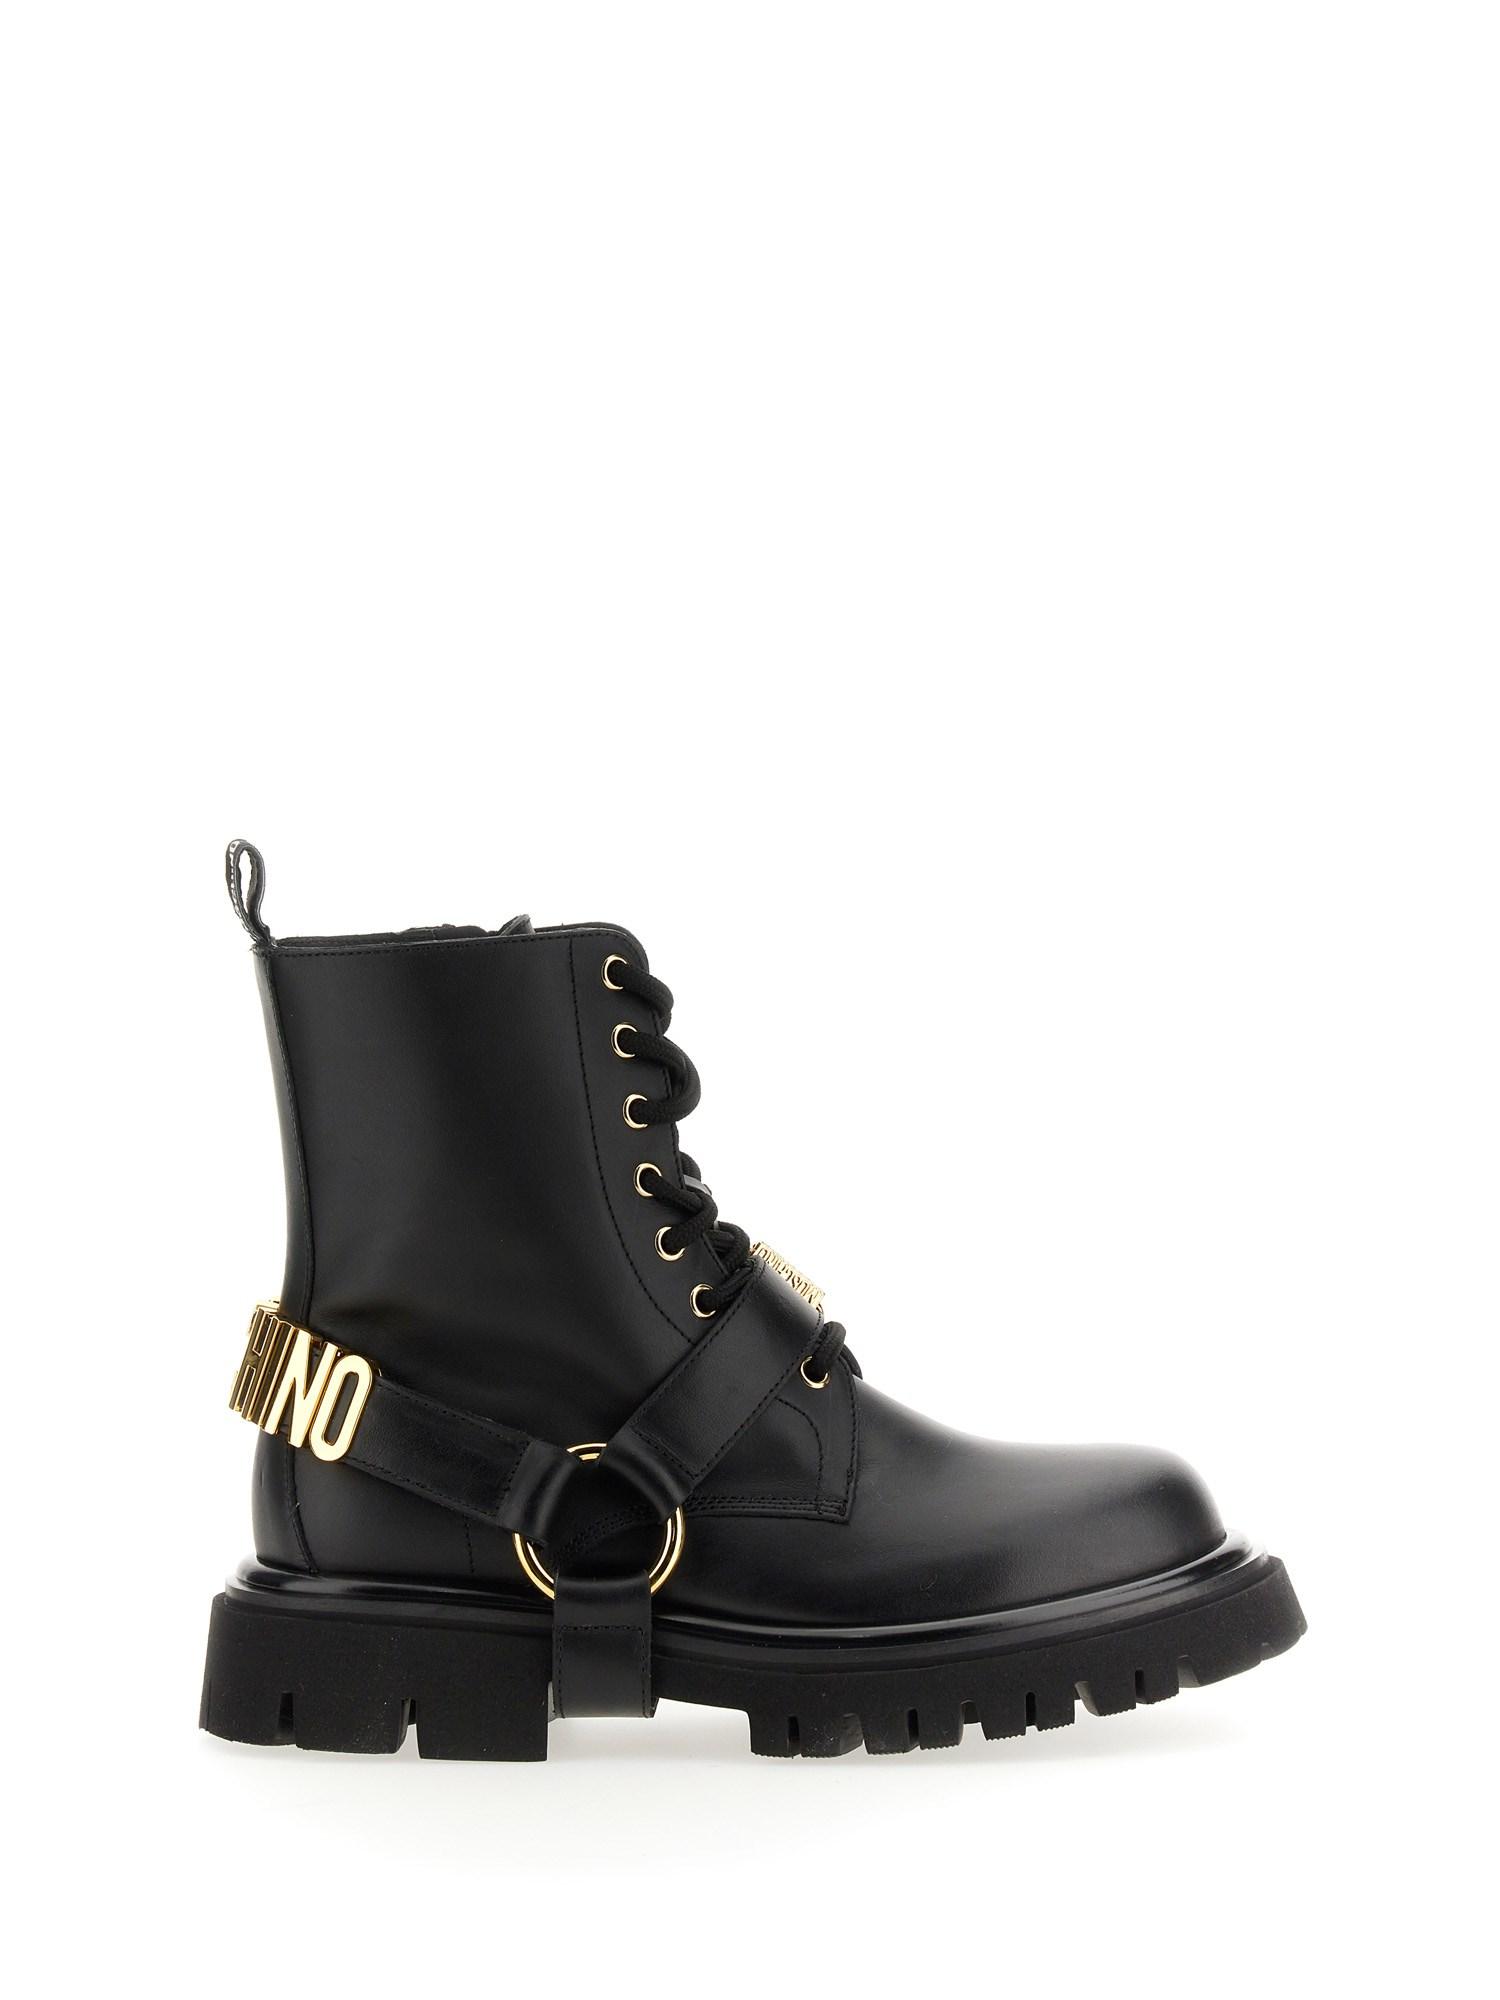 Moschino Combat Boot in Black | Lyst